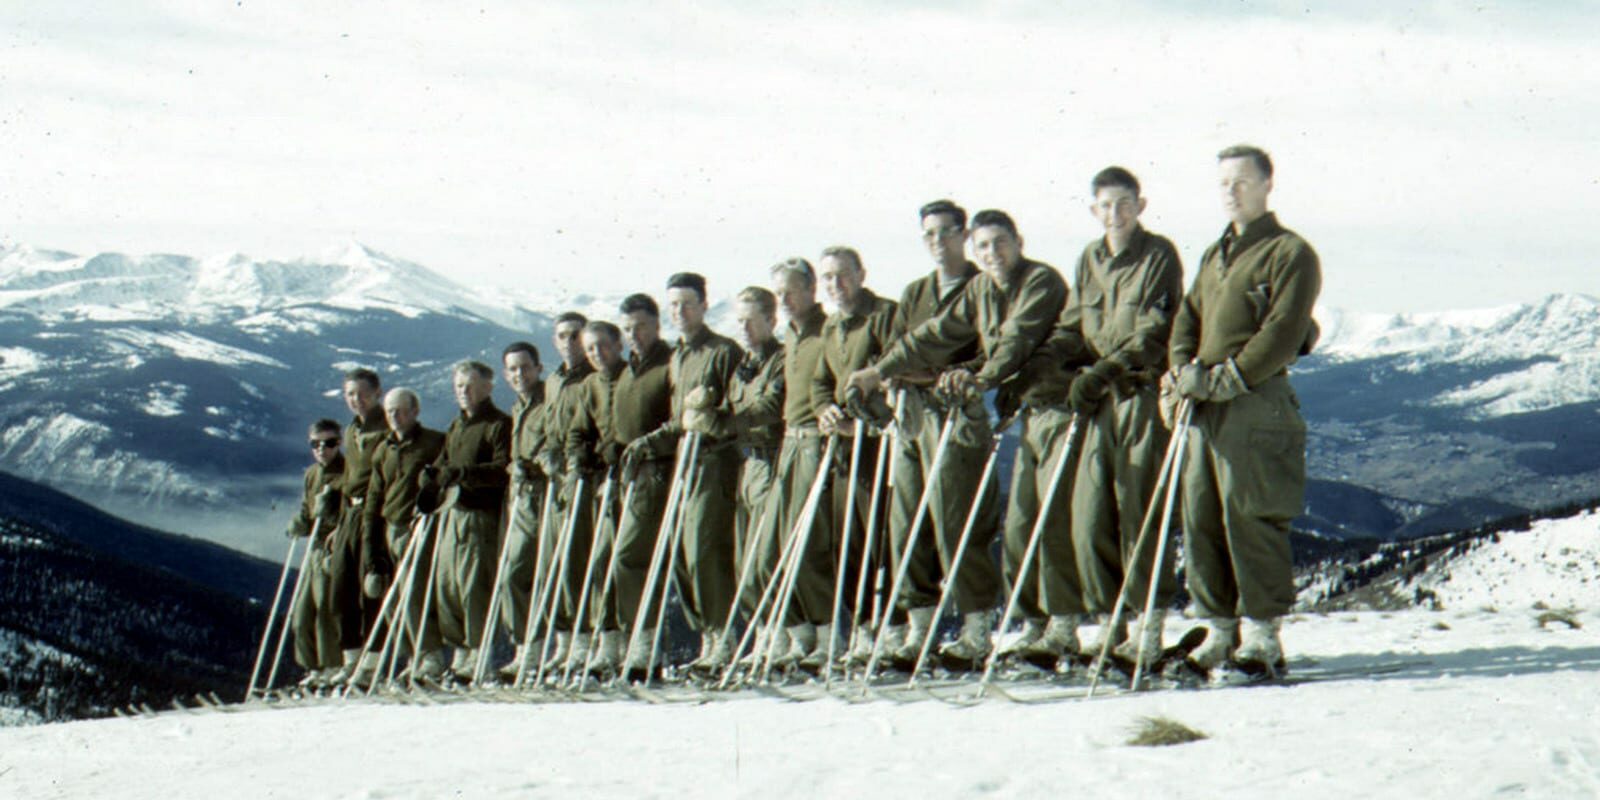 FIGHTERS ON SKIS: The US Army's 10th Mountain Division